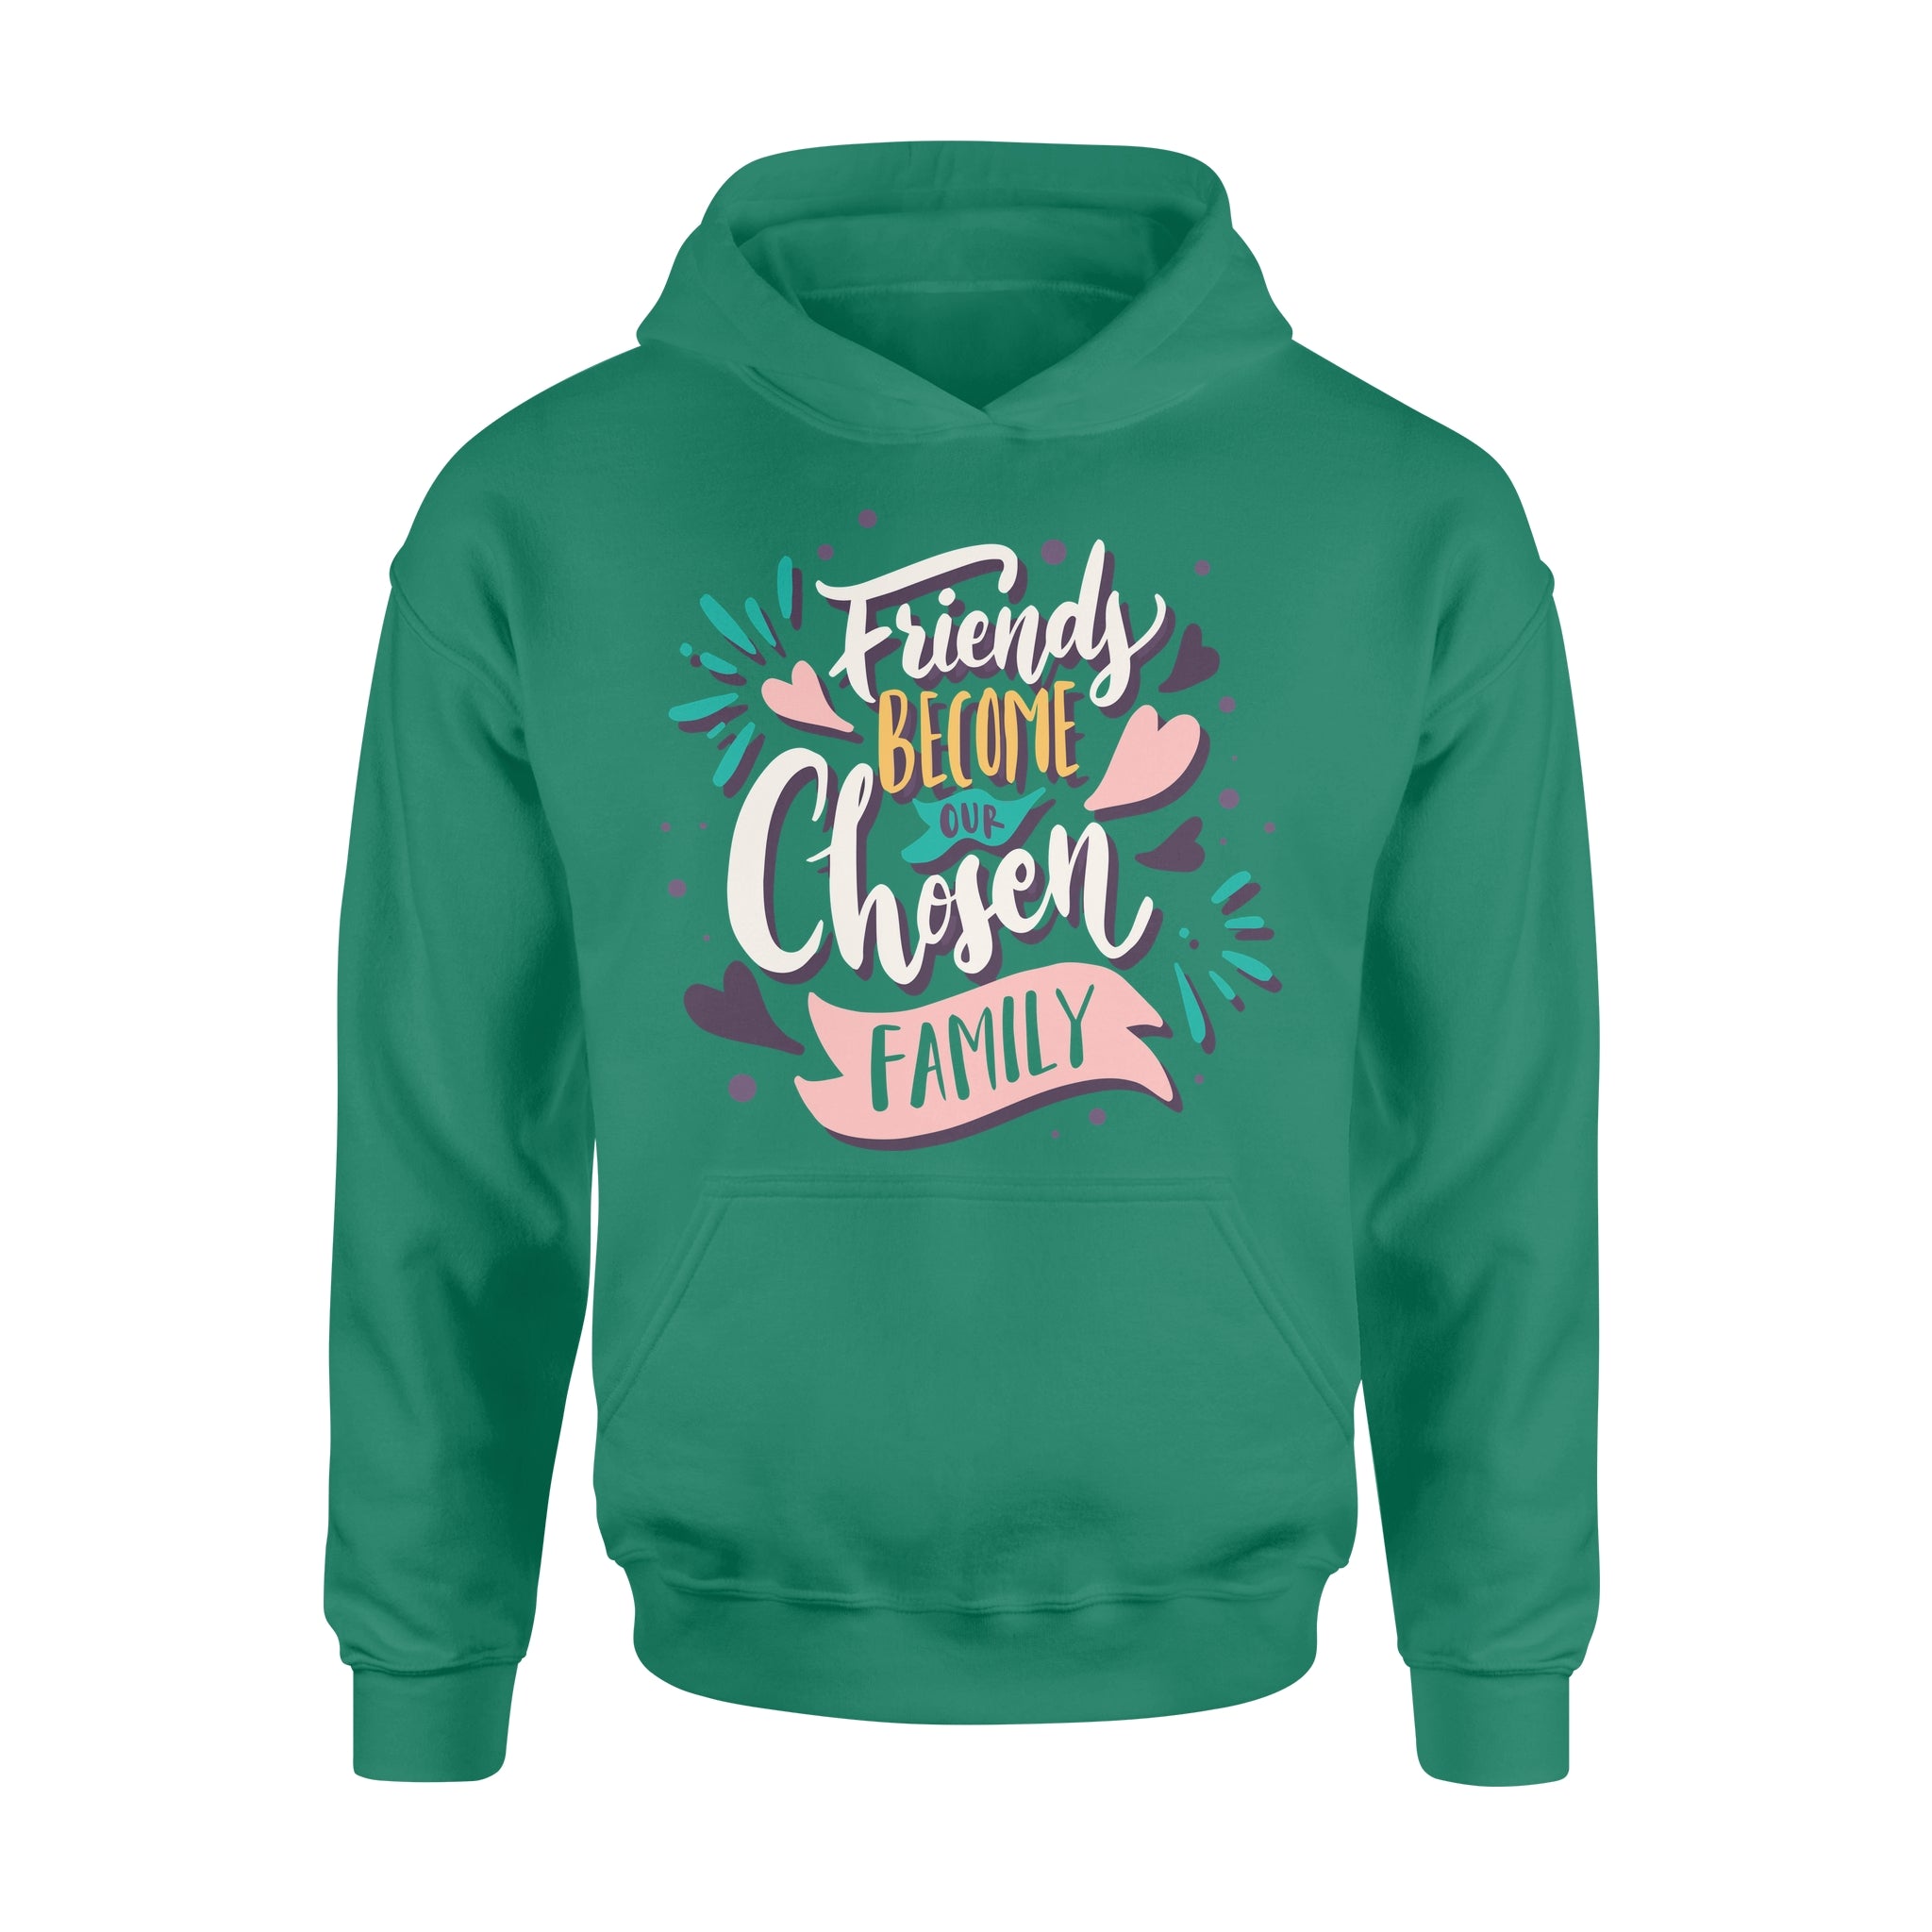 Friend Become Our Chosen Family - Hoodie